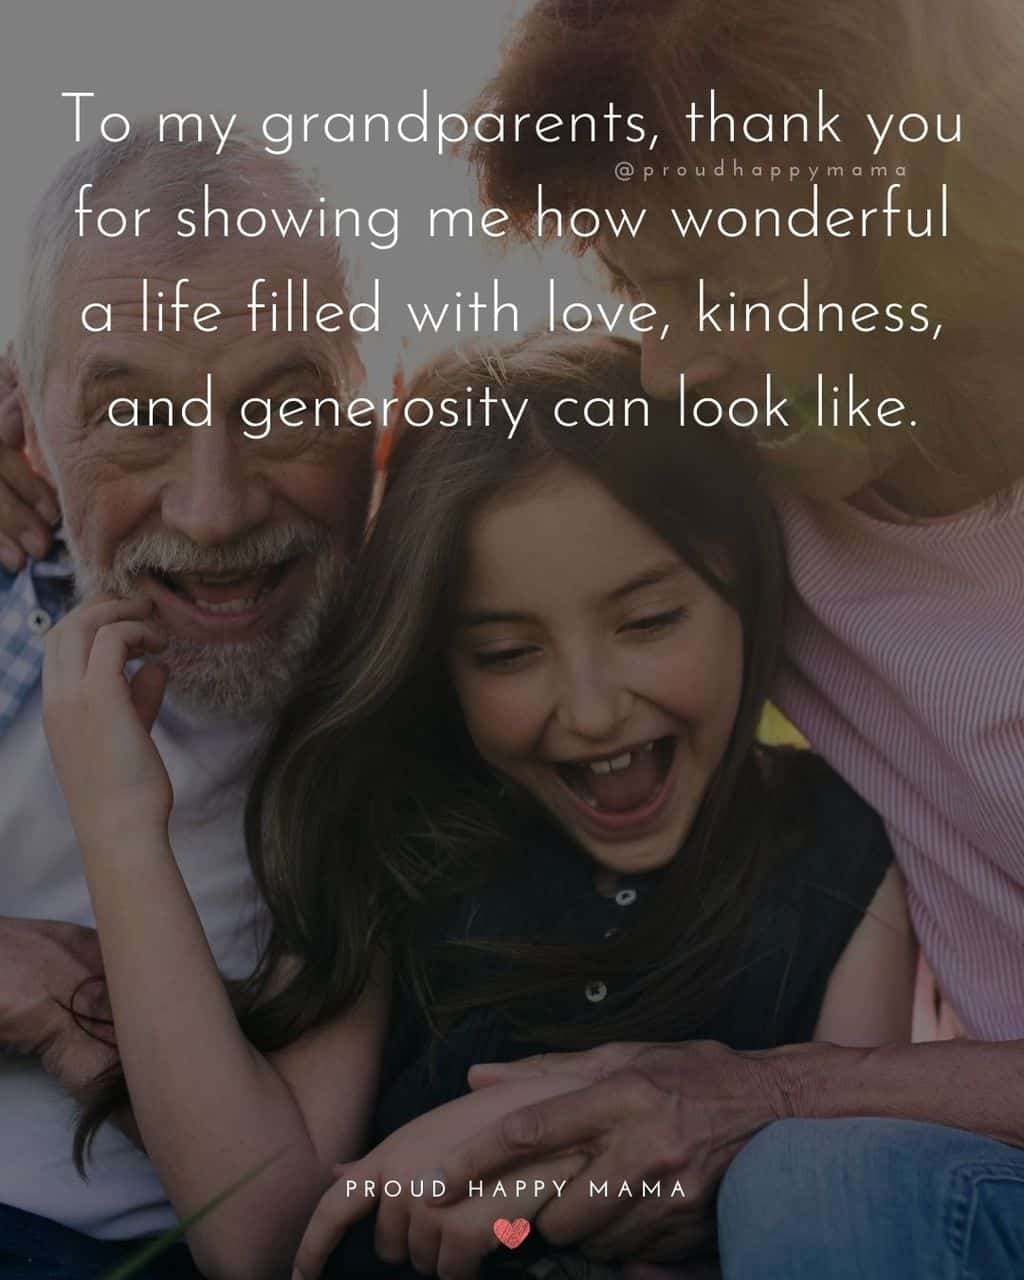 Grandparent Quotes – To my grandparents, thank you for showing me how wonderful a life filled with love, kindness, and